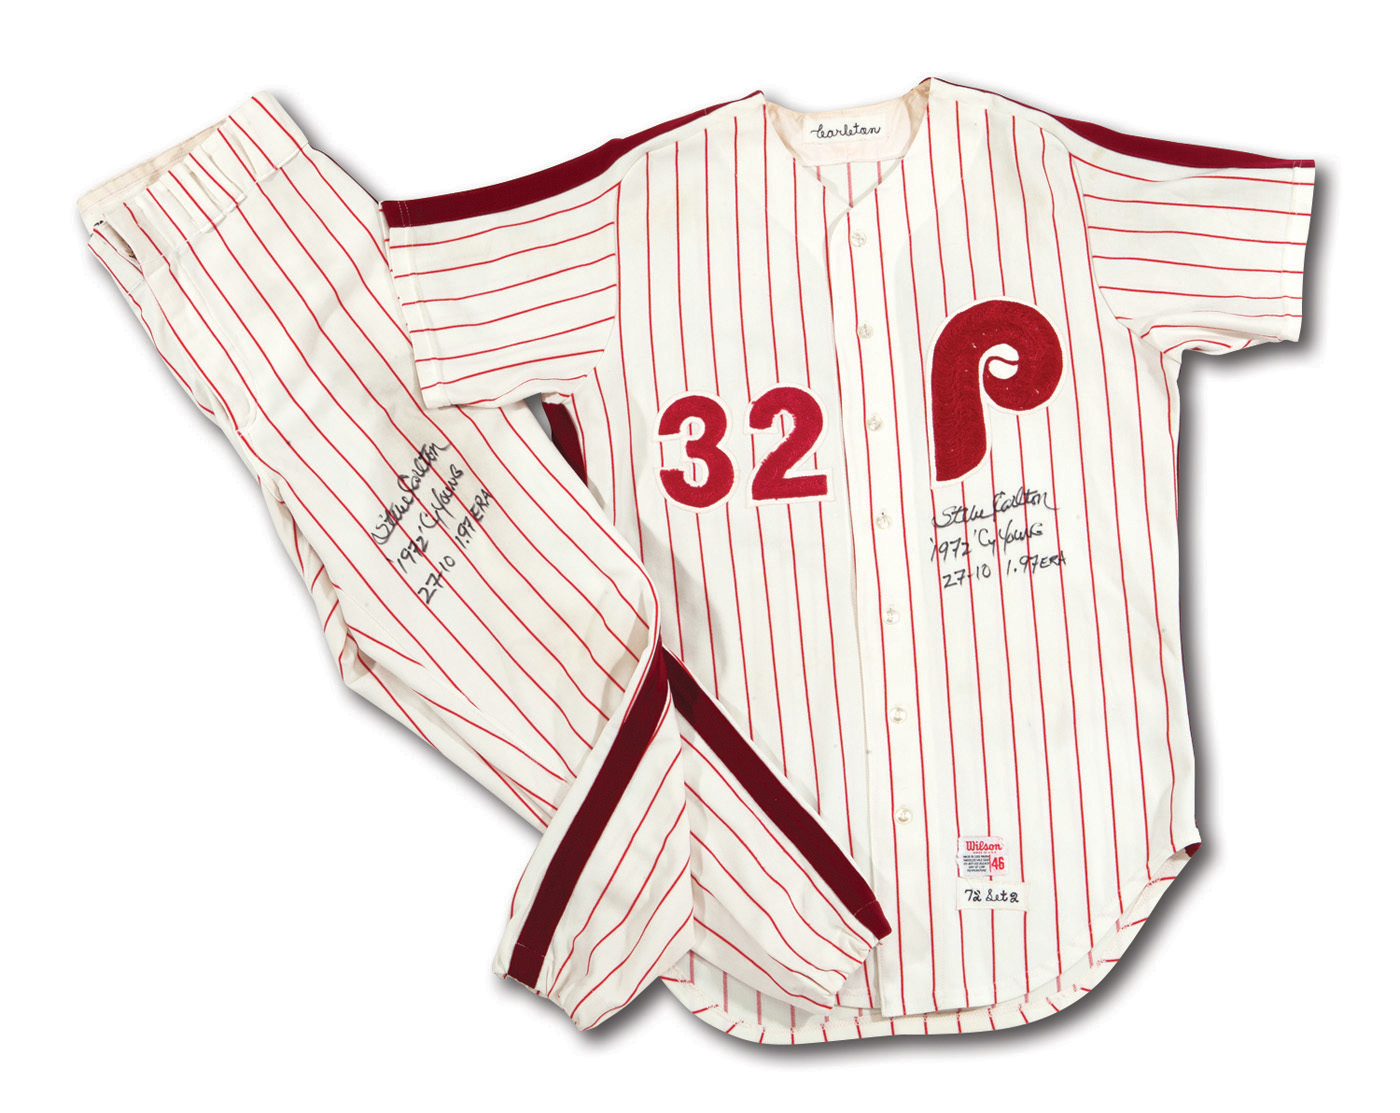 Sold at Auction: 1979 Philadelphia Phillies professional model